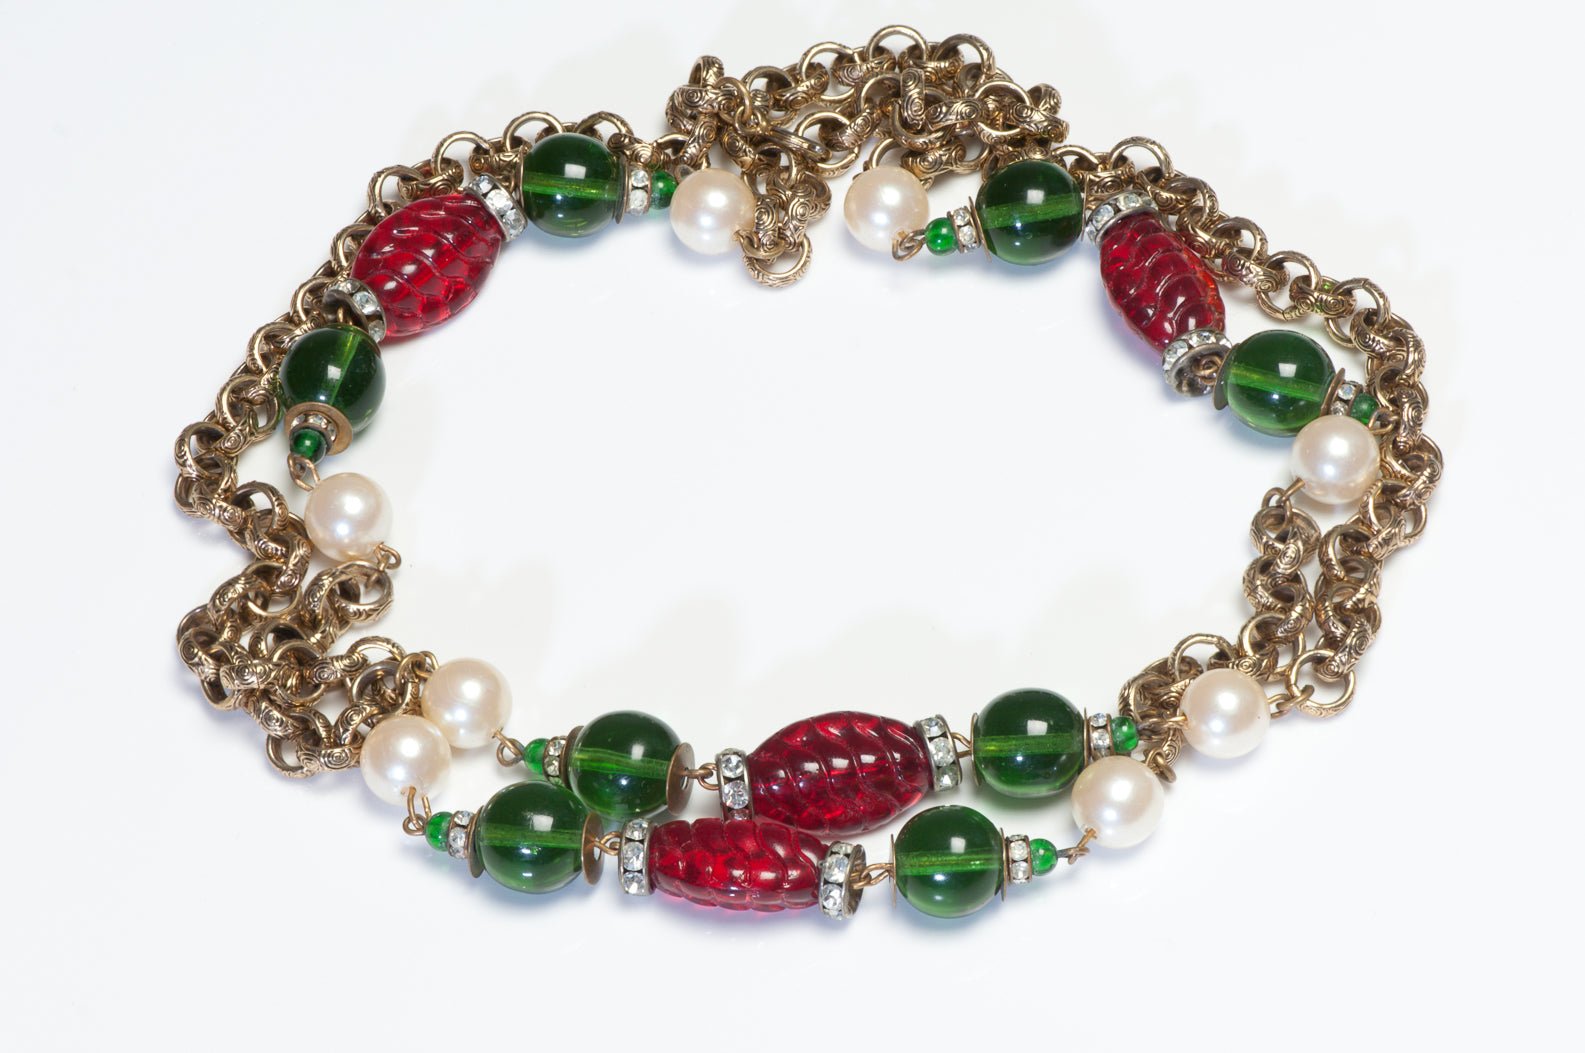 Vintage 1980's Green Red Glass Beads Crystal Chain Sautoir Necklace